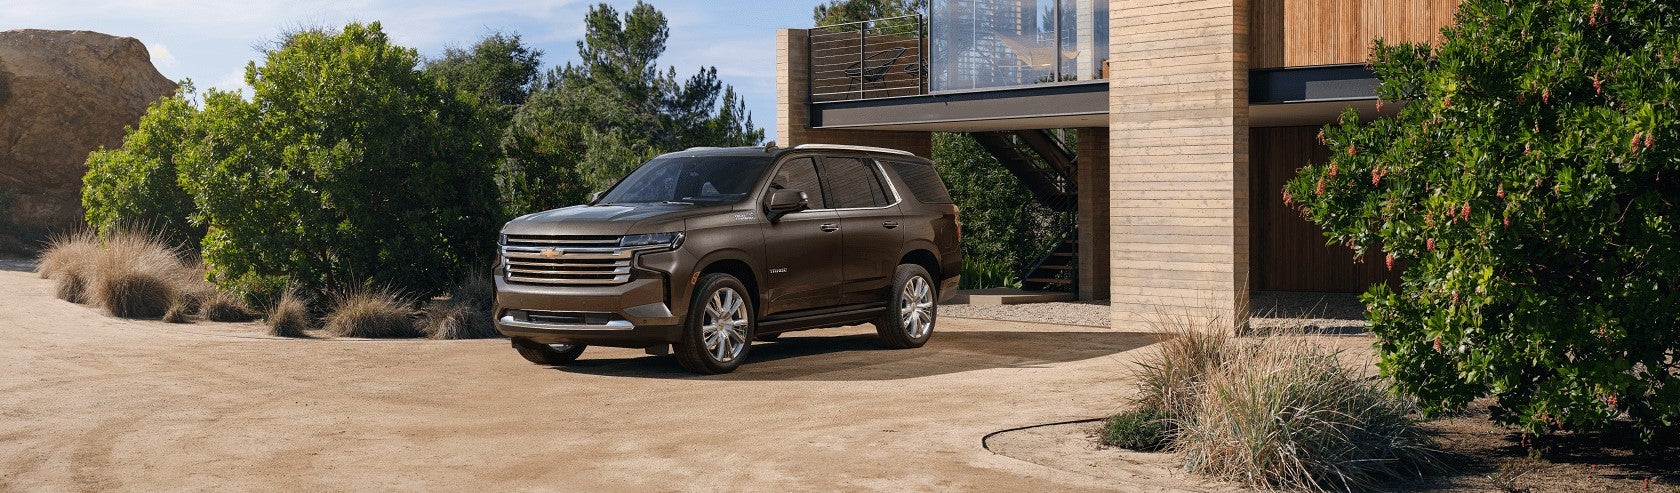 2021 Chevy Tahoe Review Columbus OH